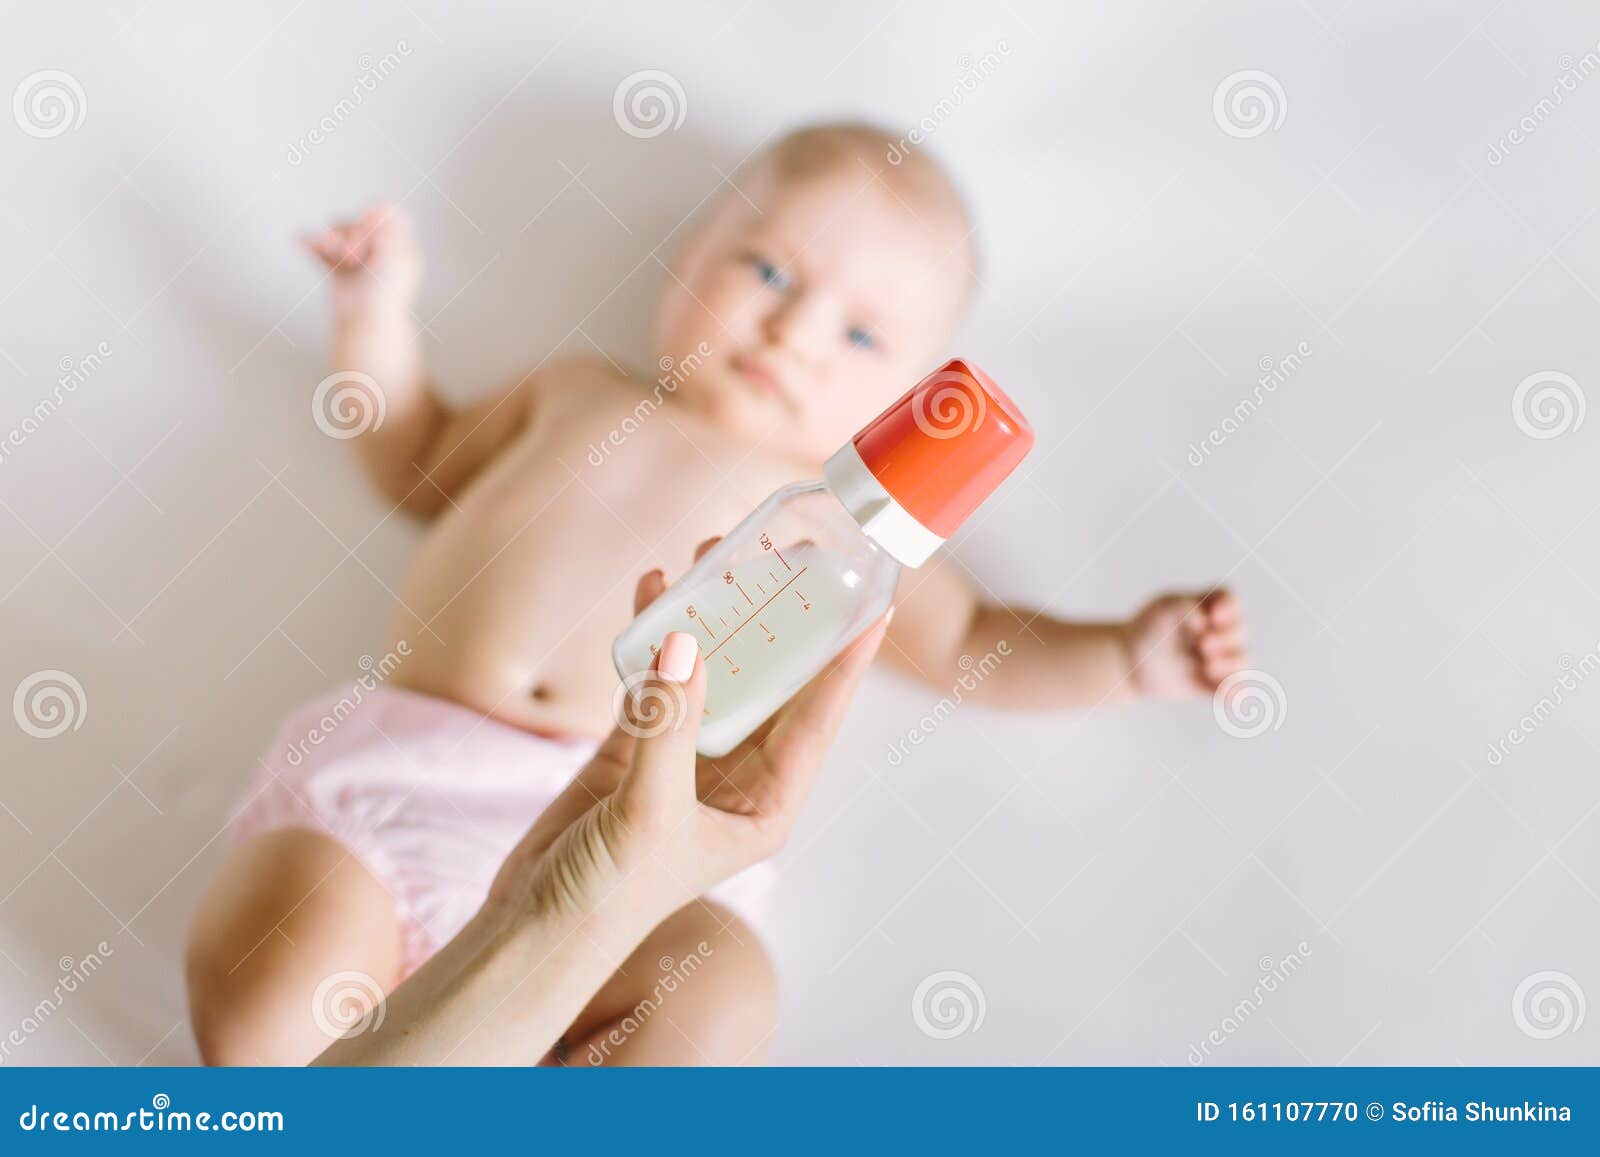 Mother Holding And Feeding Baby From Bottle Stock Photo